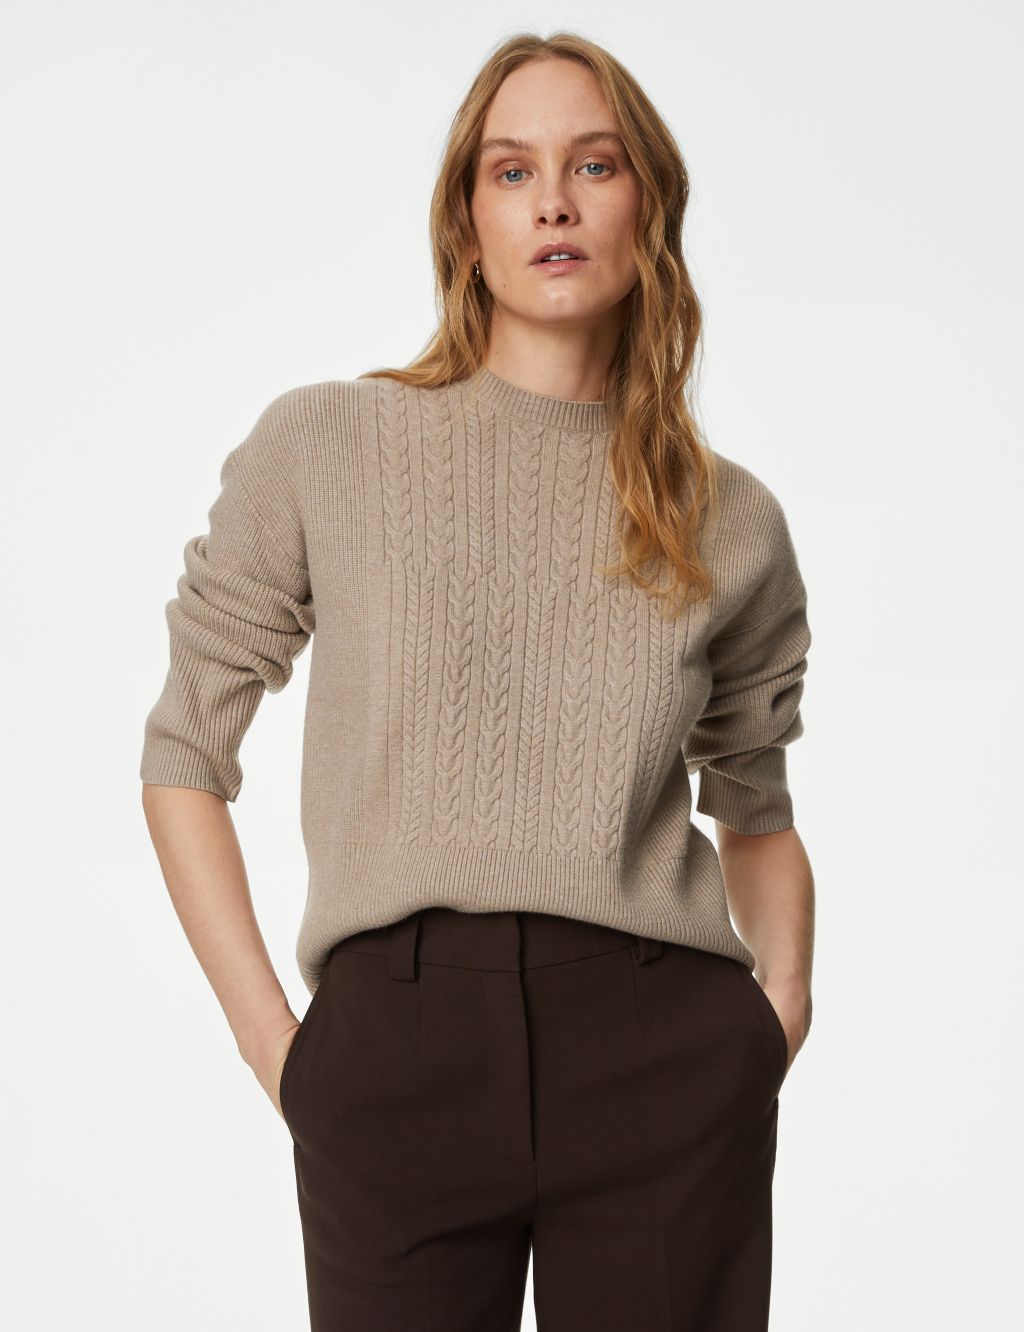 Soft Touch Textured Crew Neck Jumper image 4